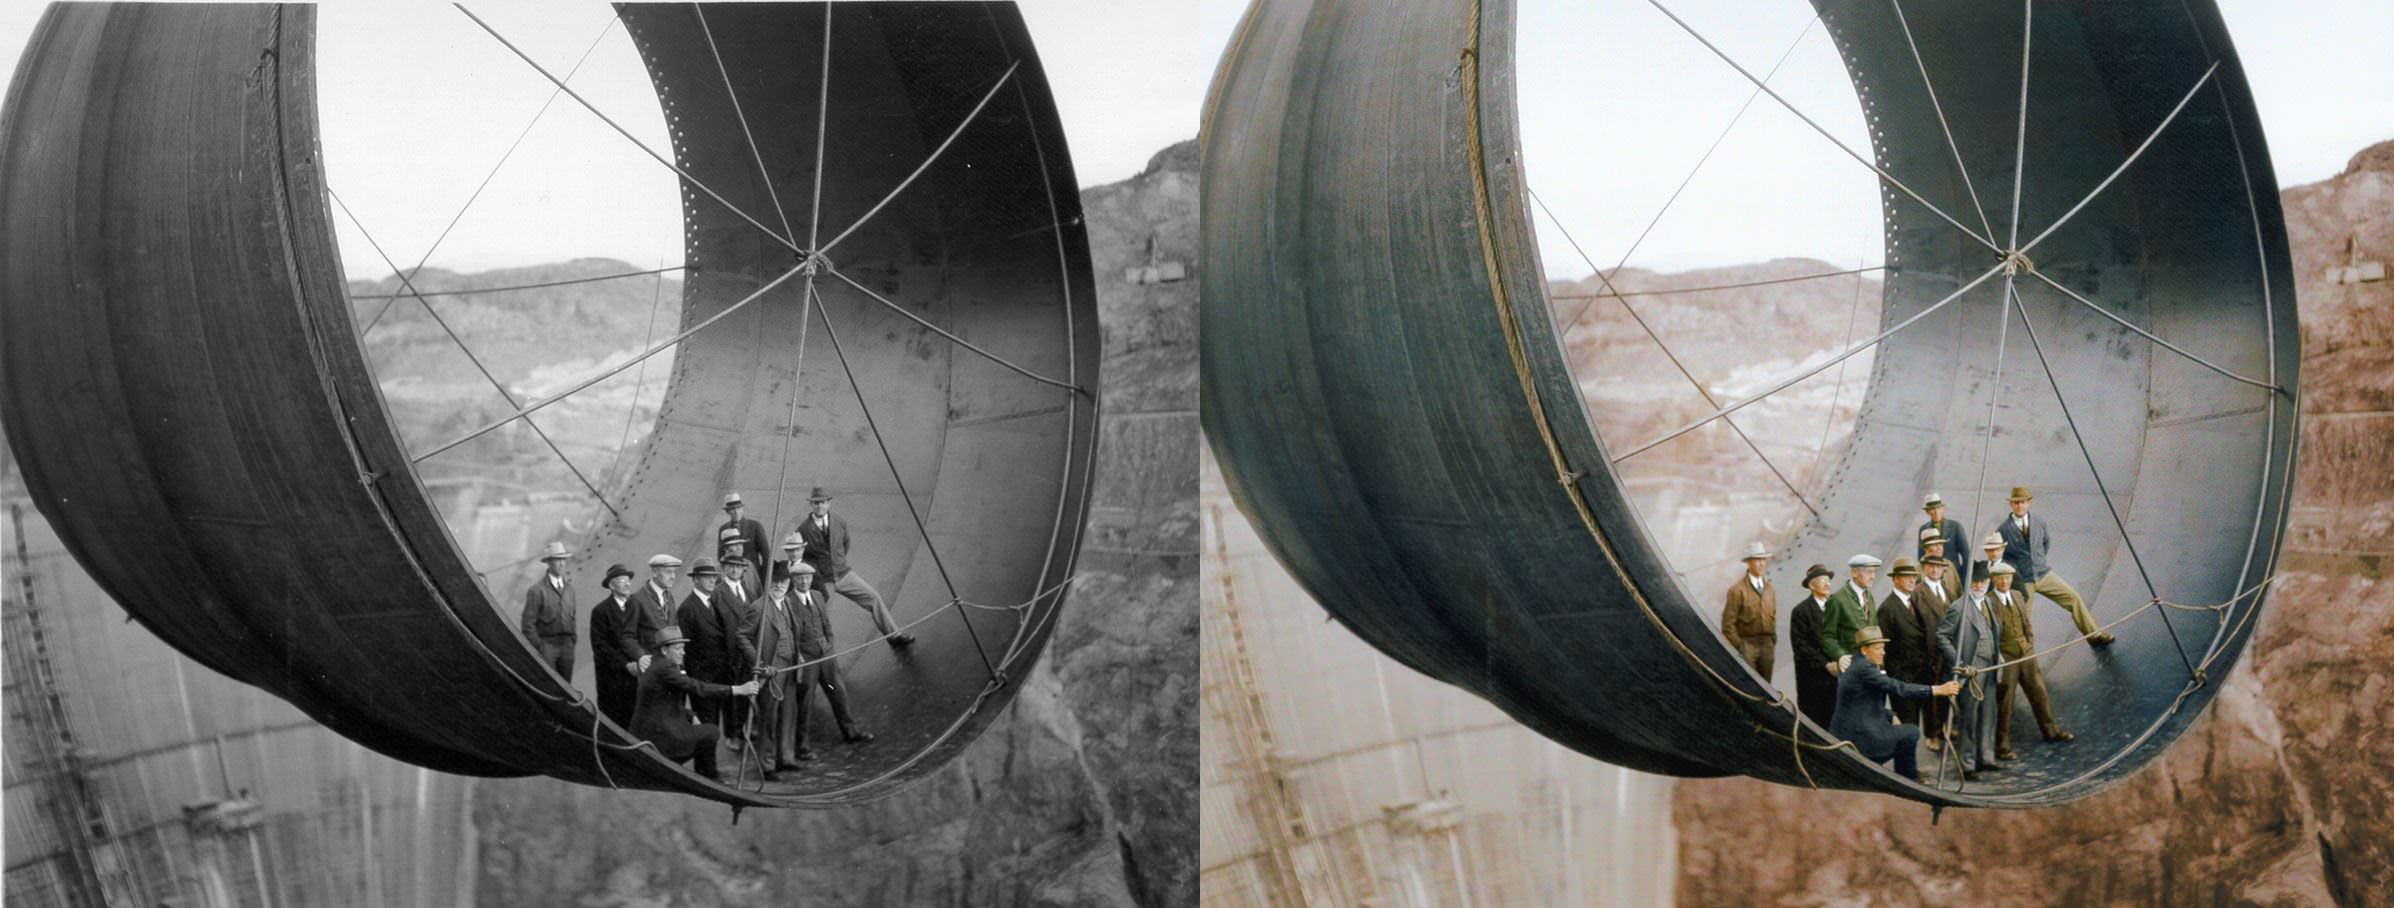 Work on the Hoover Dam in 1935.